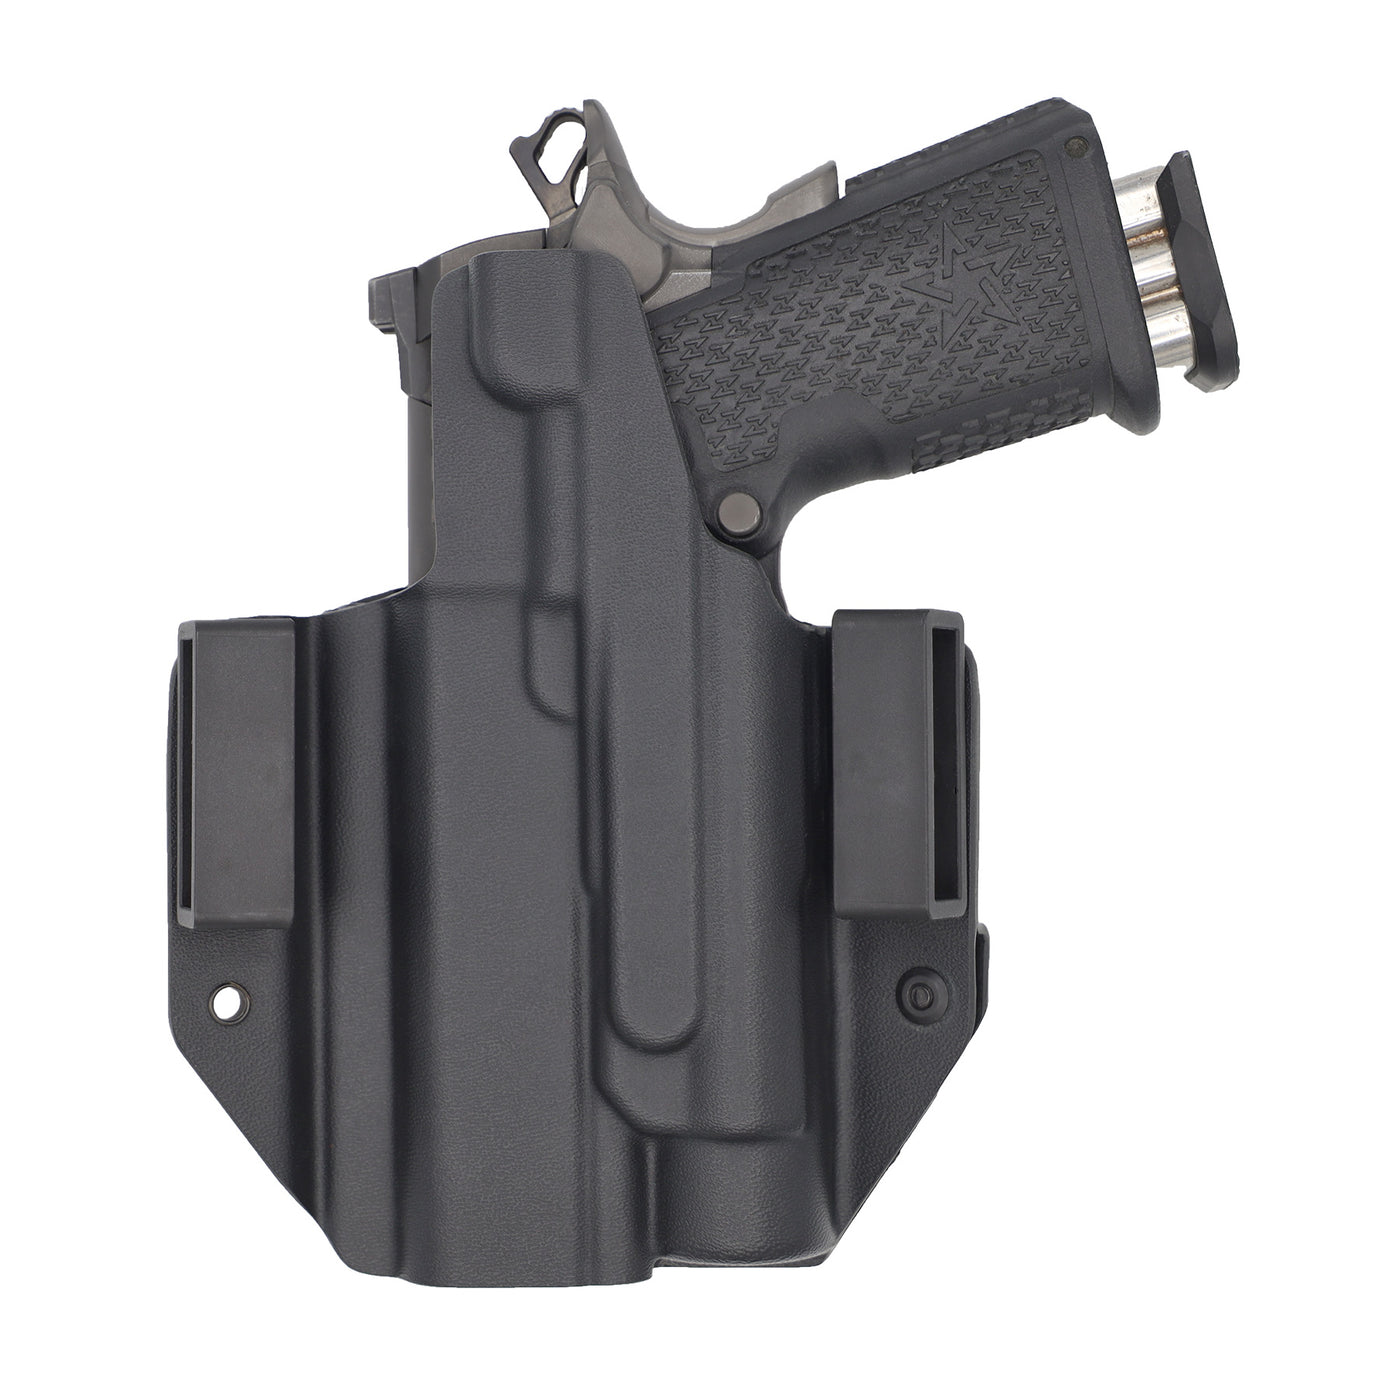 C&G Holsters Quickship OWB Tactical 1911/2011 Streamlight TLR1 in holstered position back view